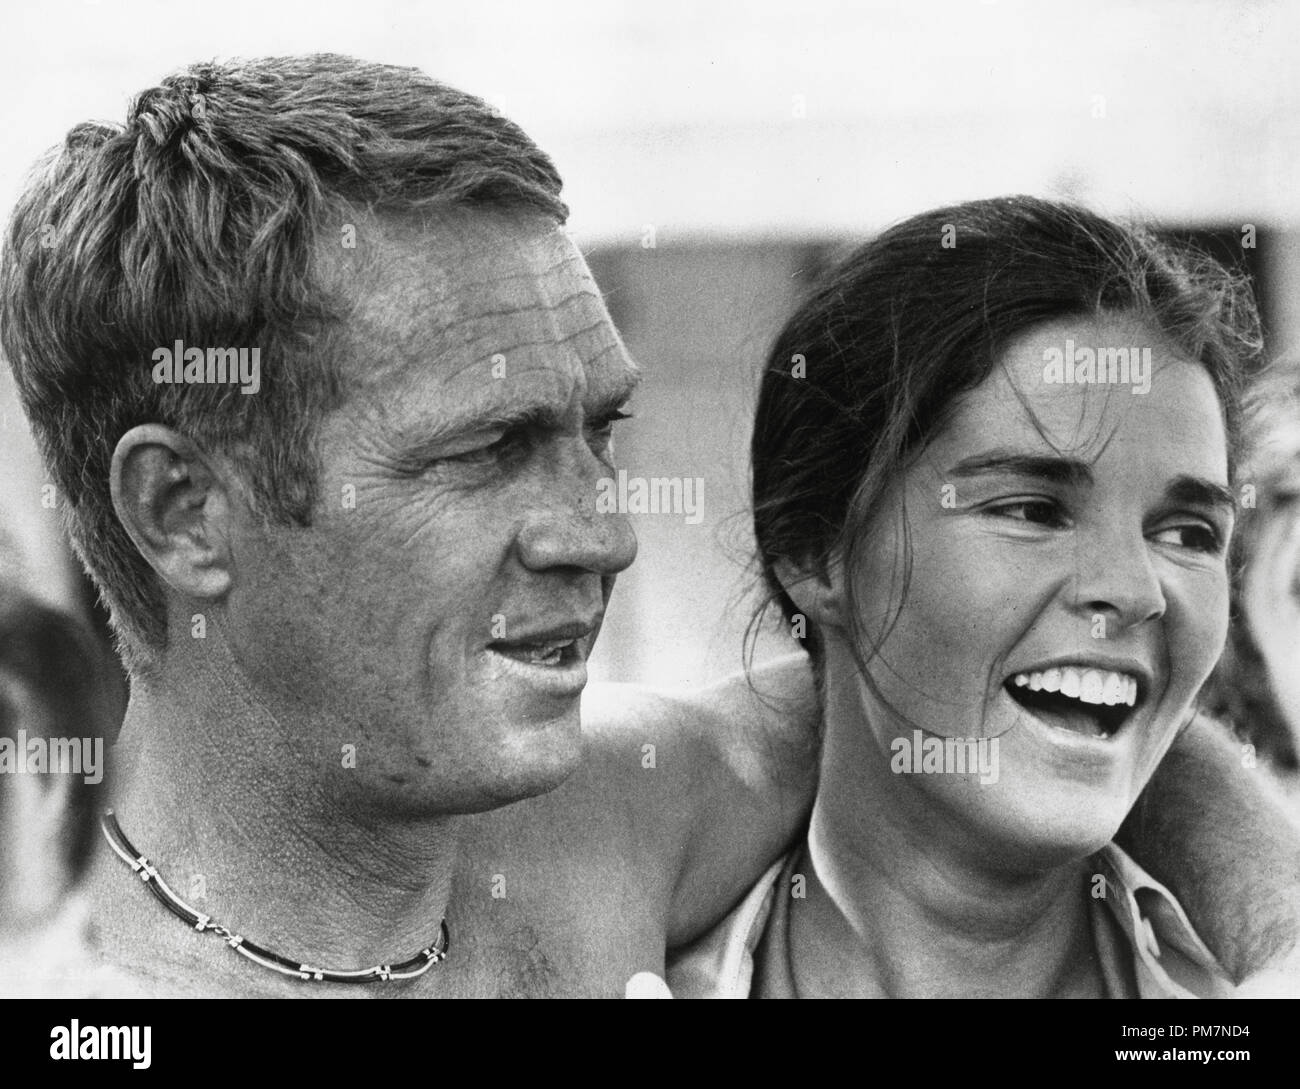 Steve McQueen, Ali Macgraw, 'The Getaway' 1972 Warner File Reference # 31202 864THA Stock Photo